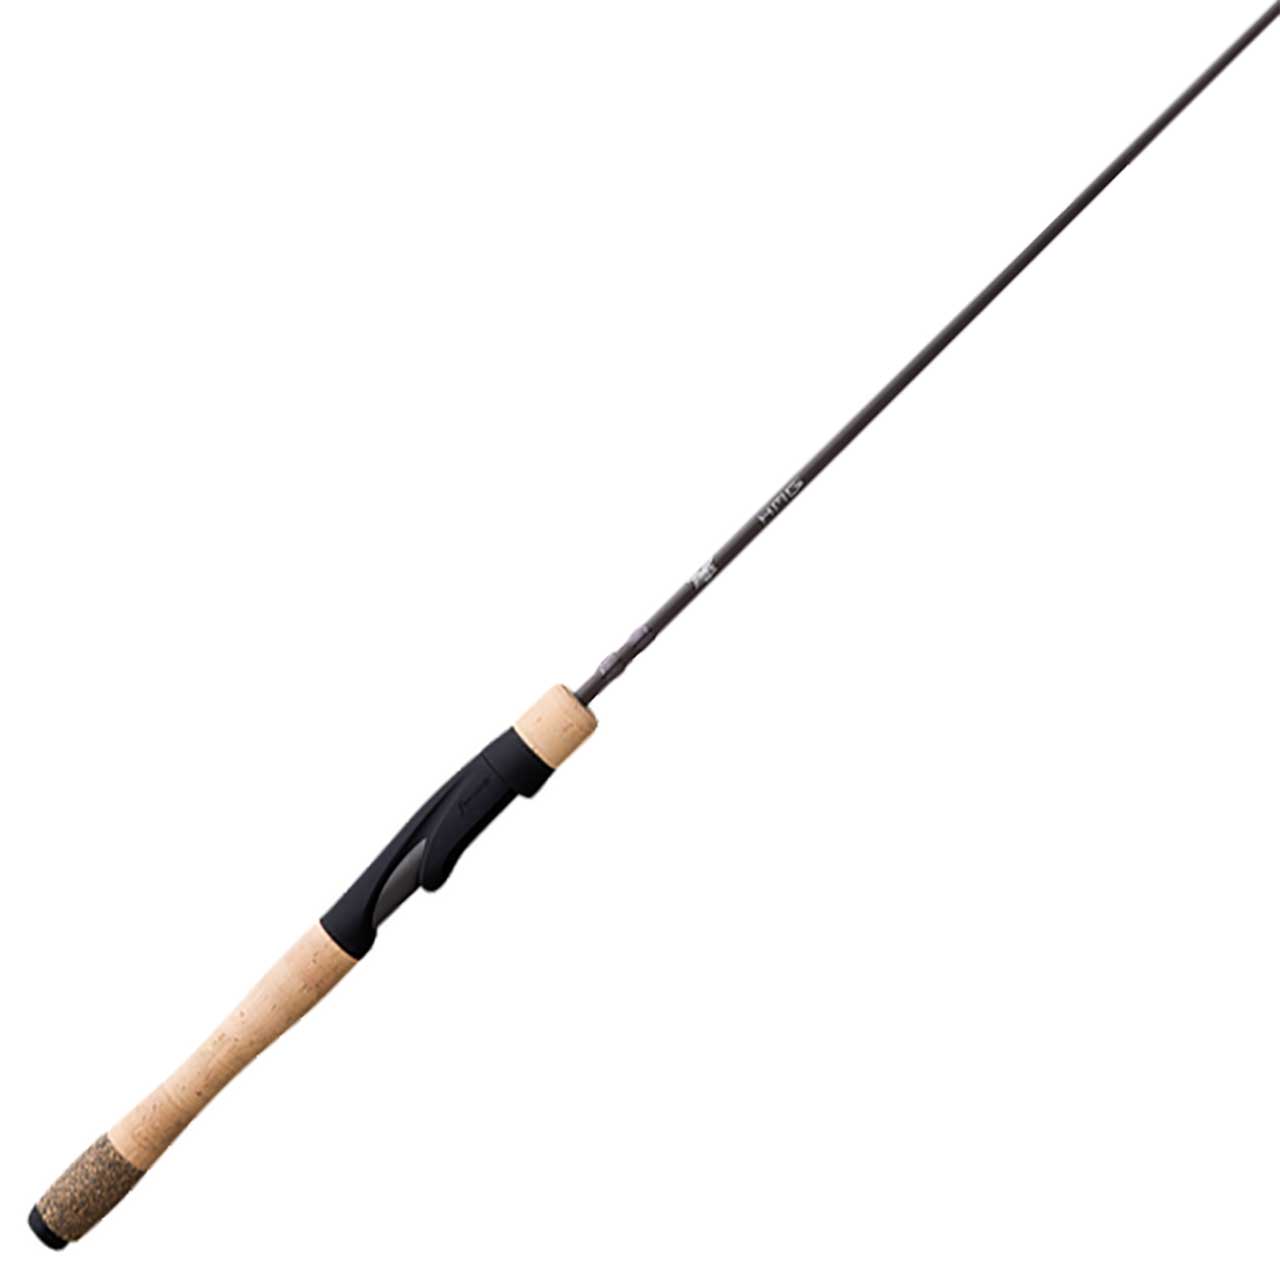 All Freshwater Fly Fishing Rod Fenwick Fishing Rods & Poles for sale